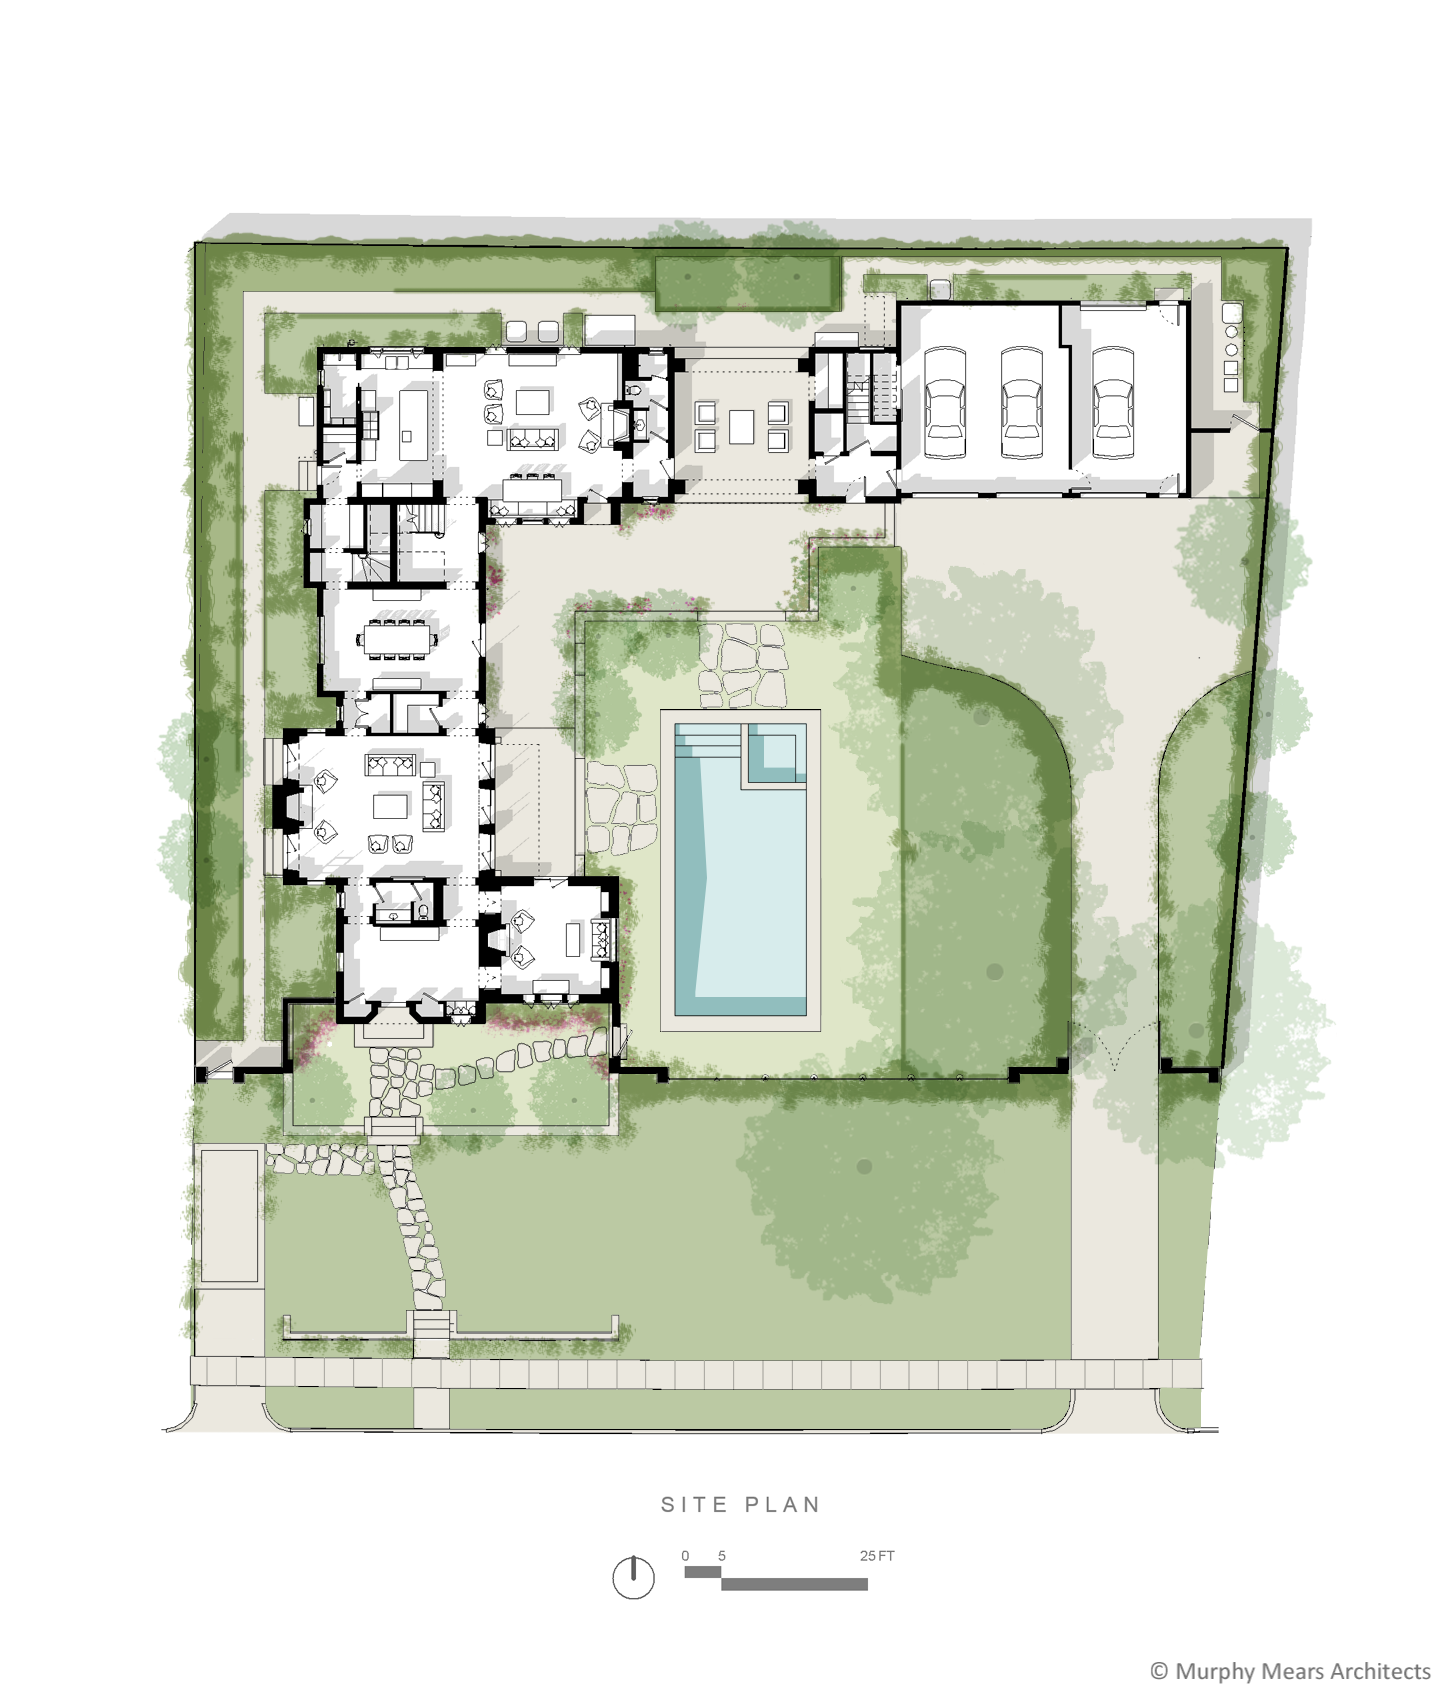 Courtyard House - Site Plan showing the public entry and private drive separated on opposite sides of the site by a central outdoor space.